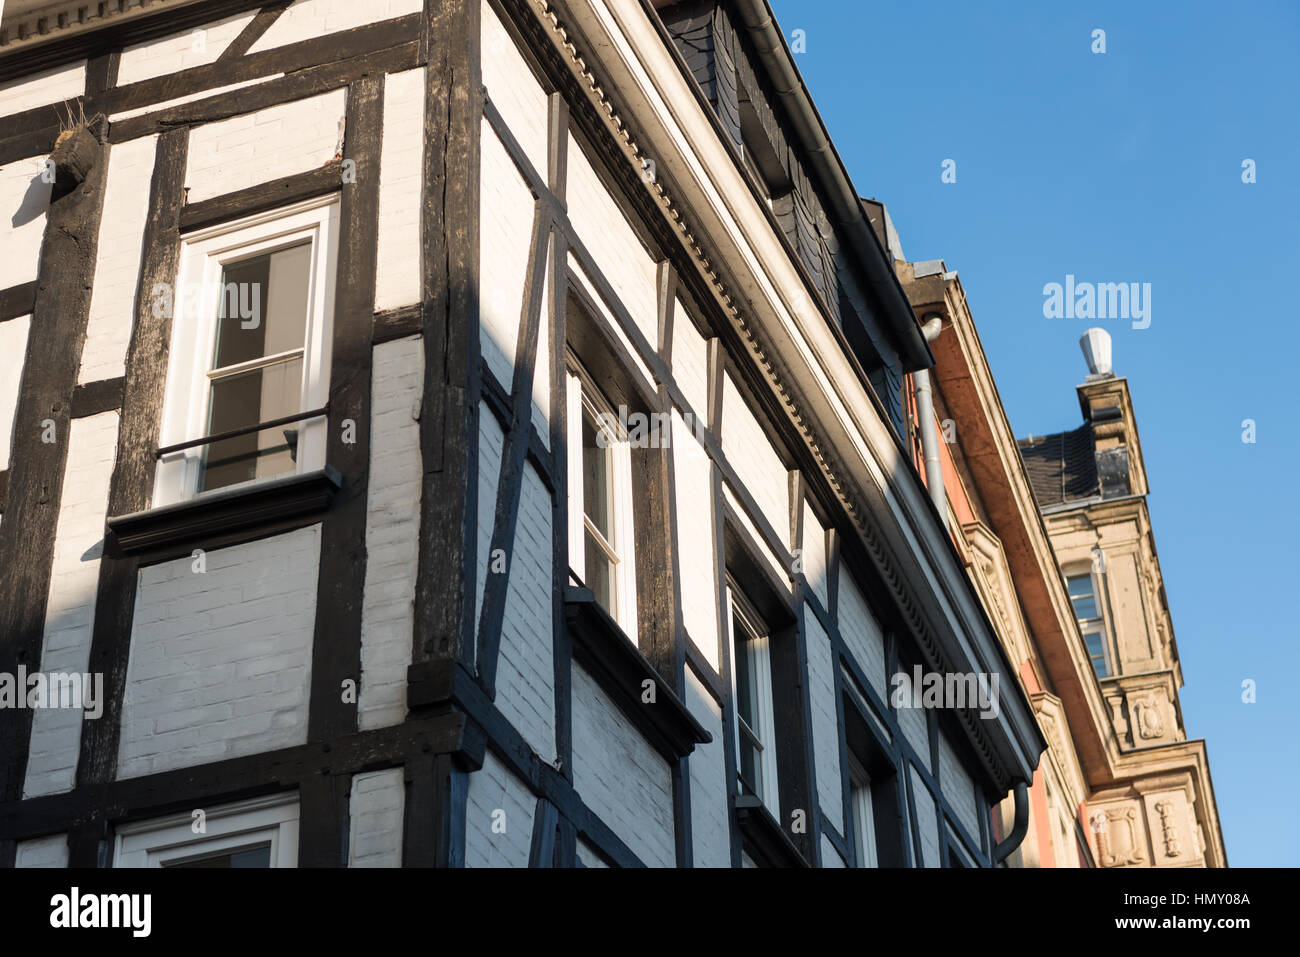 ESSEN, GERMANY - JANUARY 25, 2017: Essen-Werden is famous for its historic half-timbered houses Stock Photo